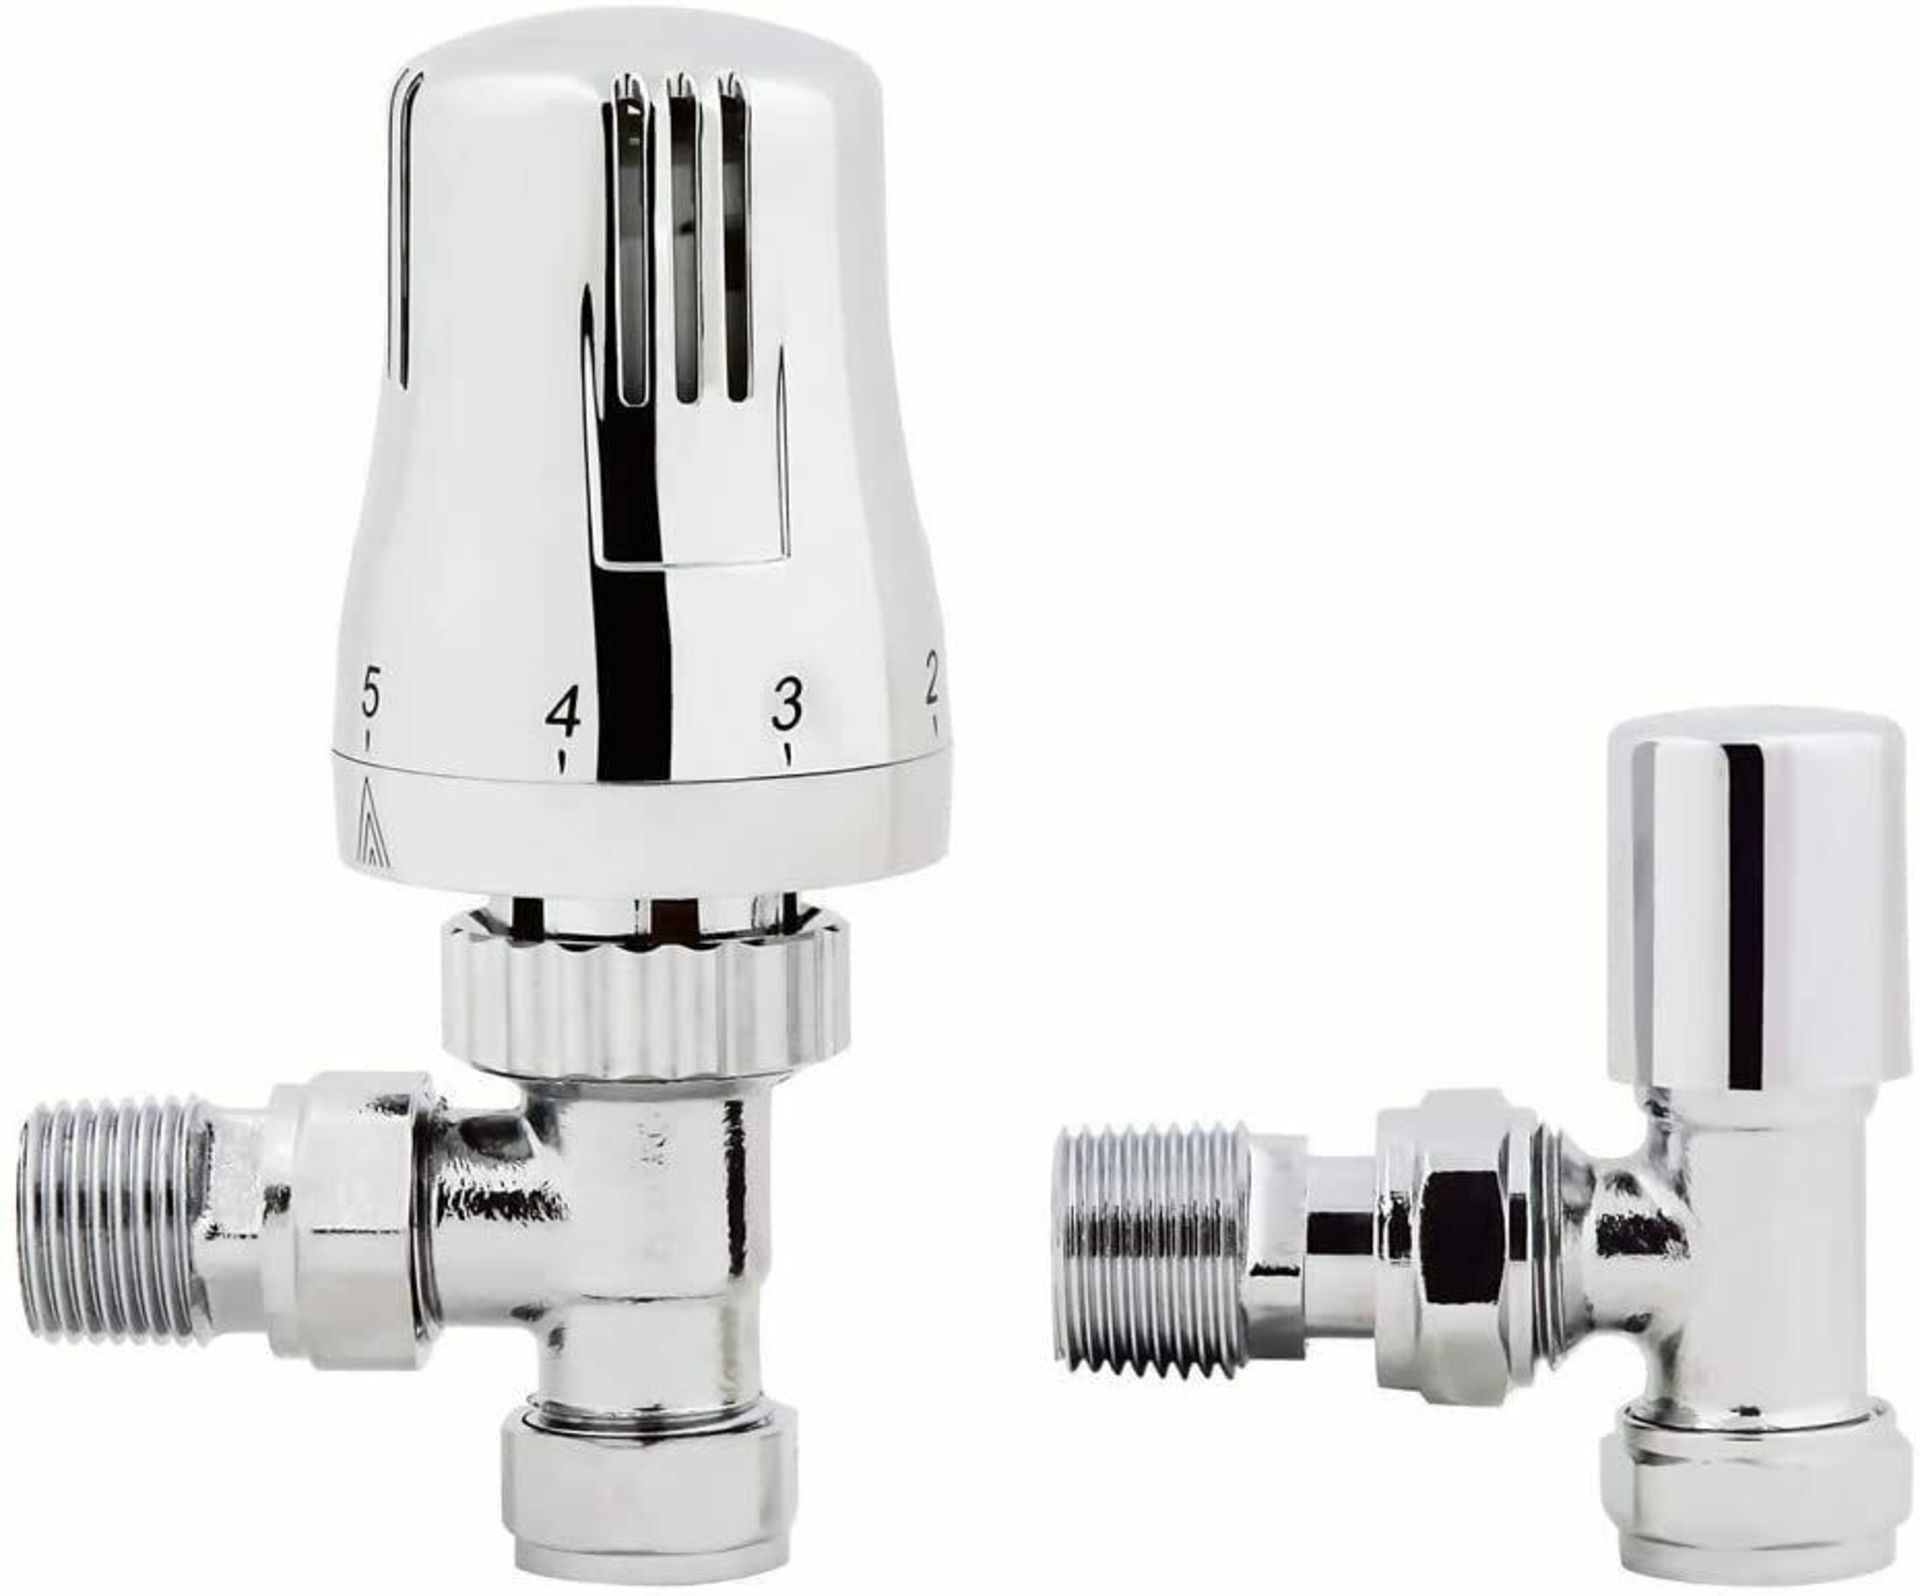 NEW & BOXED Chrome Thermostatic Control Angled Designer Radiator Valves Pair 15mm _" NEW. RRP ...